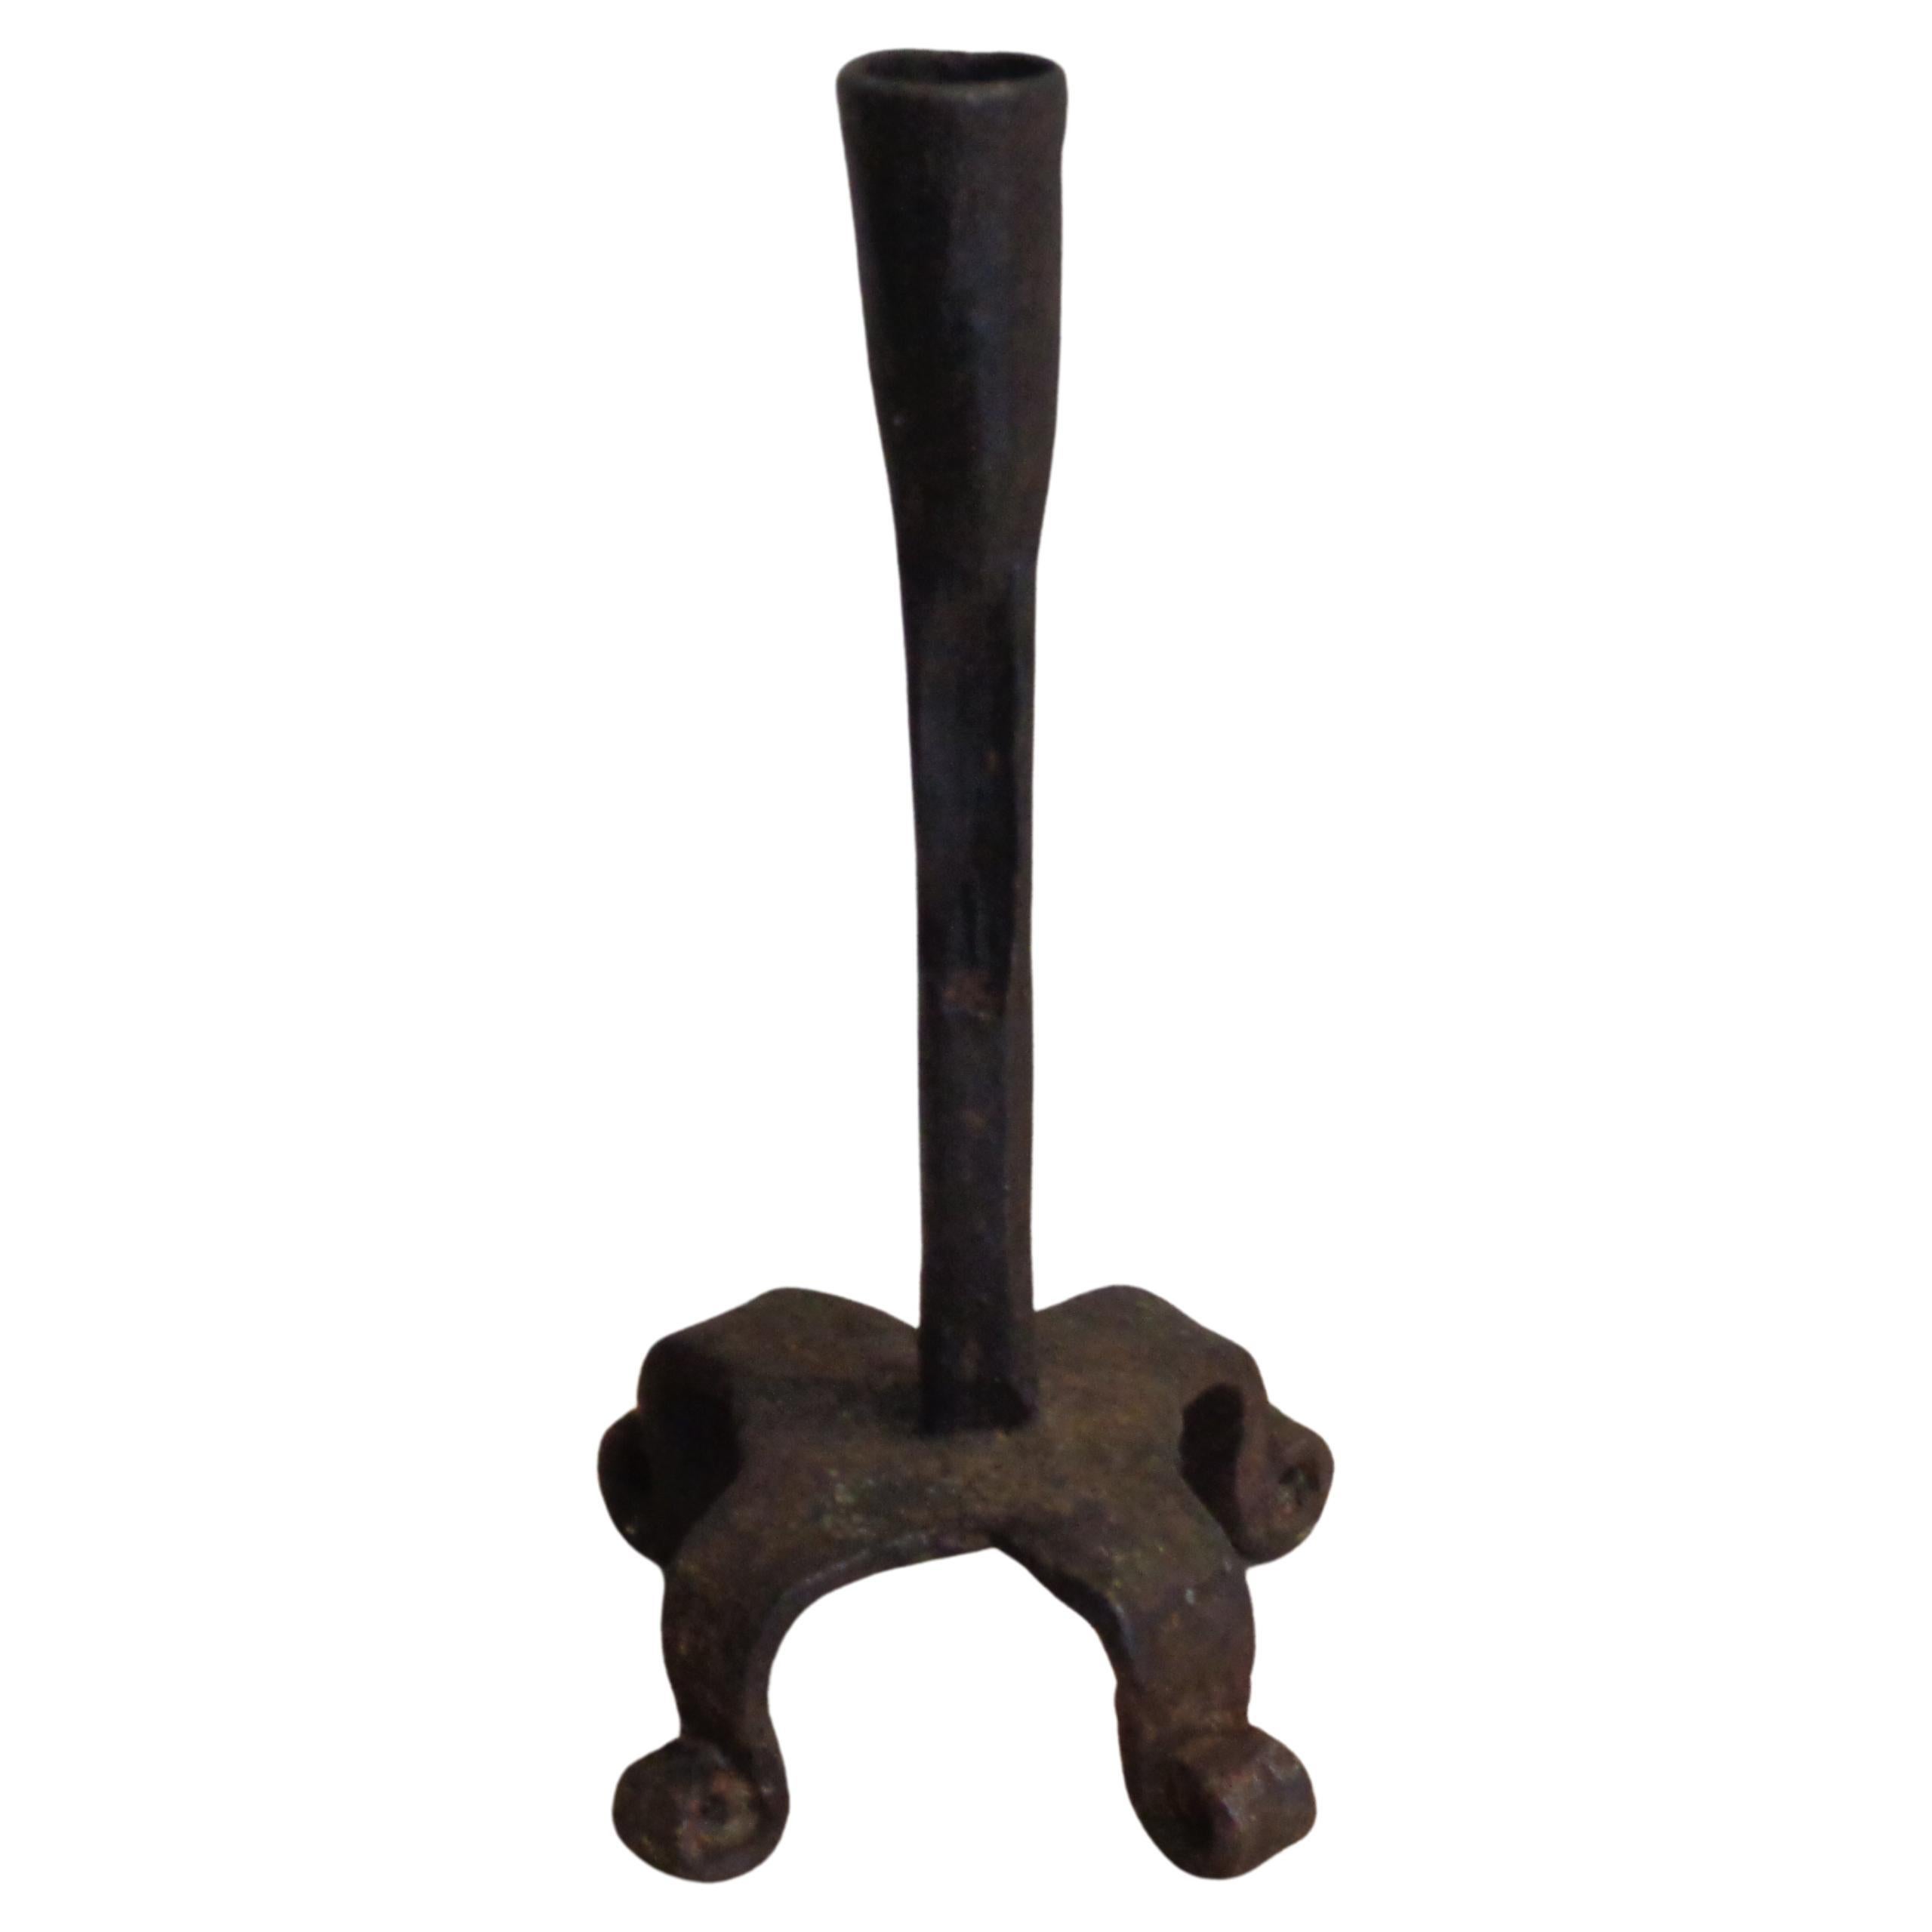 18th century hand forged primitive iron candlestick in nicely aged original old surface. Measures 8 inches high x 4 1/2 inches across curled four footed base. Look at all pictures and read condition report in comment section.